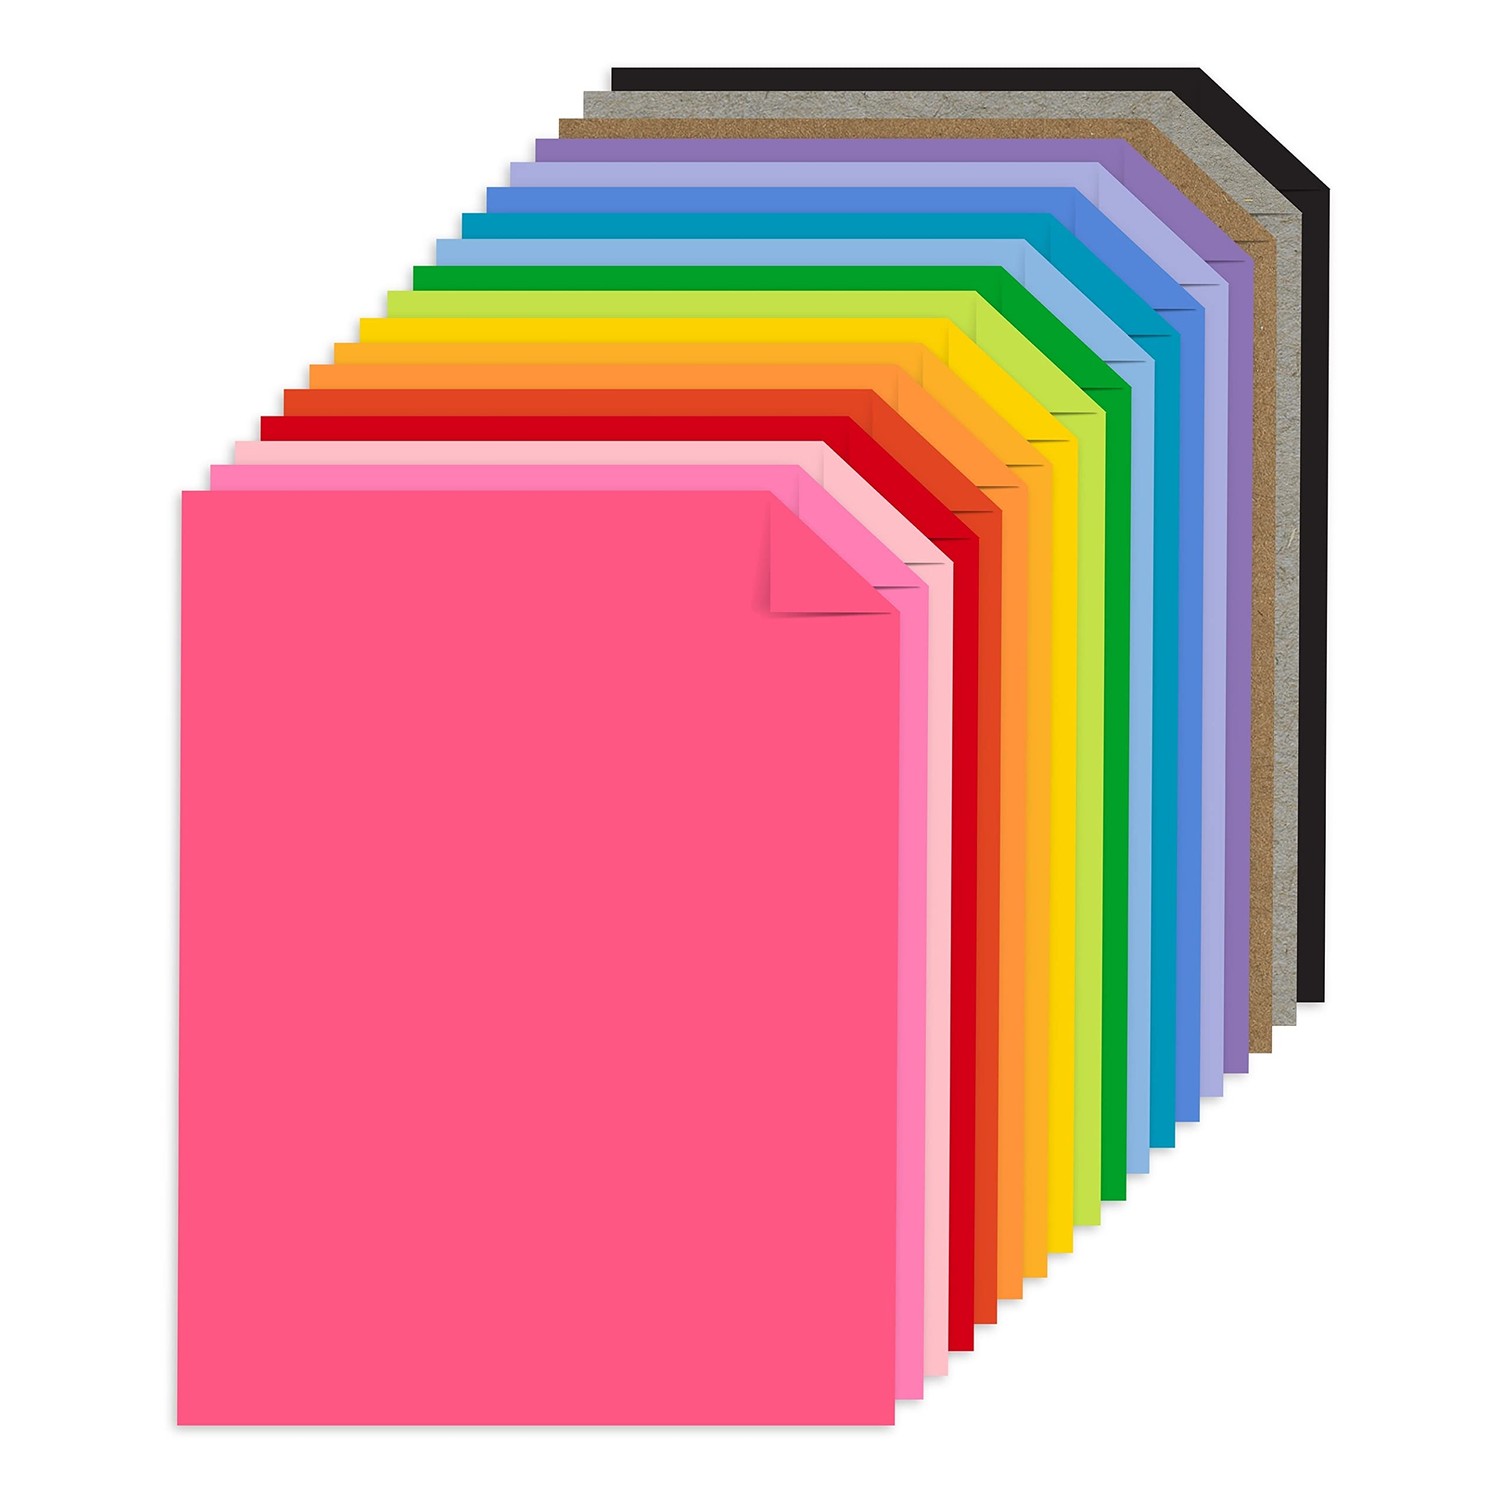 Bubblegum Pink Cardstock Paper - 8.5 x 11 inch 65 lb. Cover -50 Sheets from Cardstock Warehouse